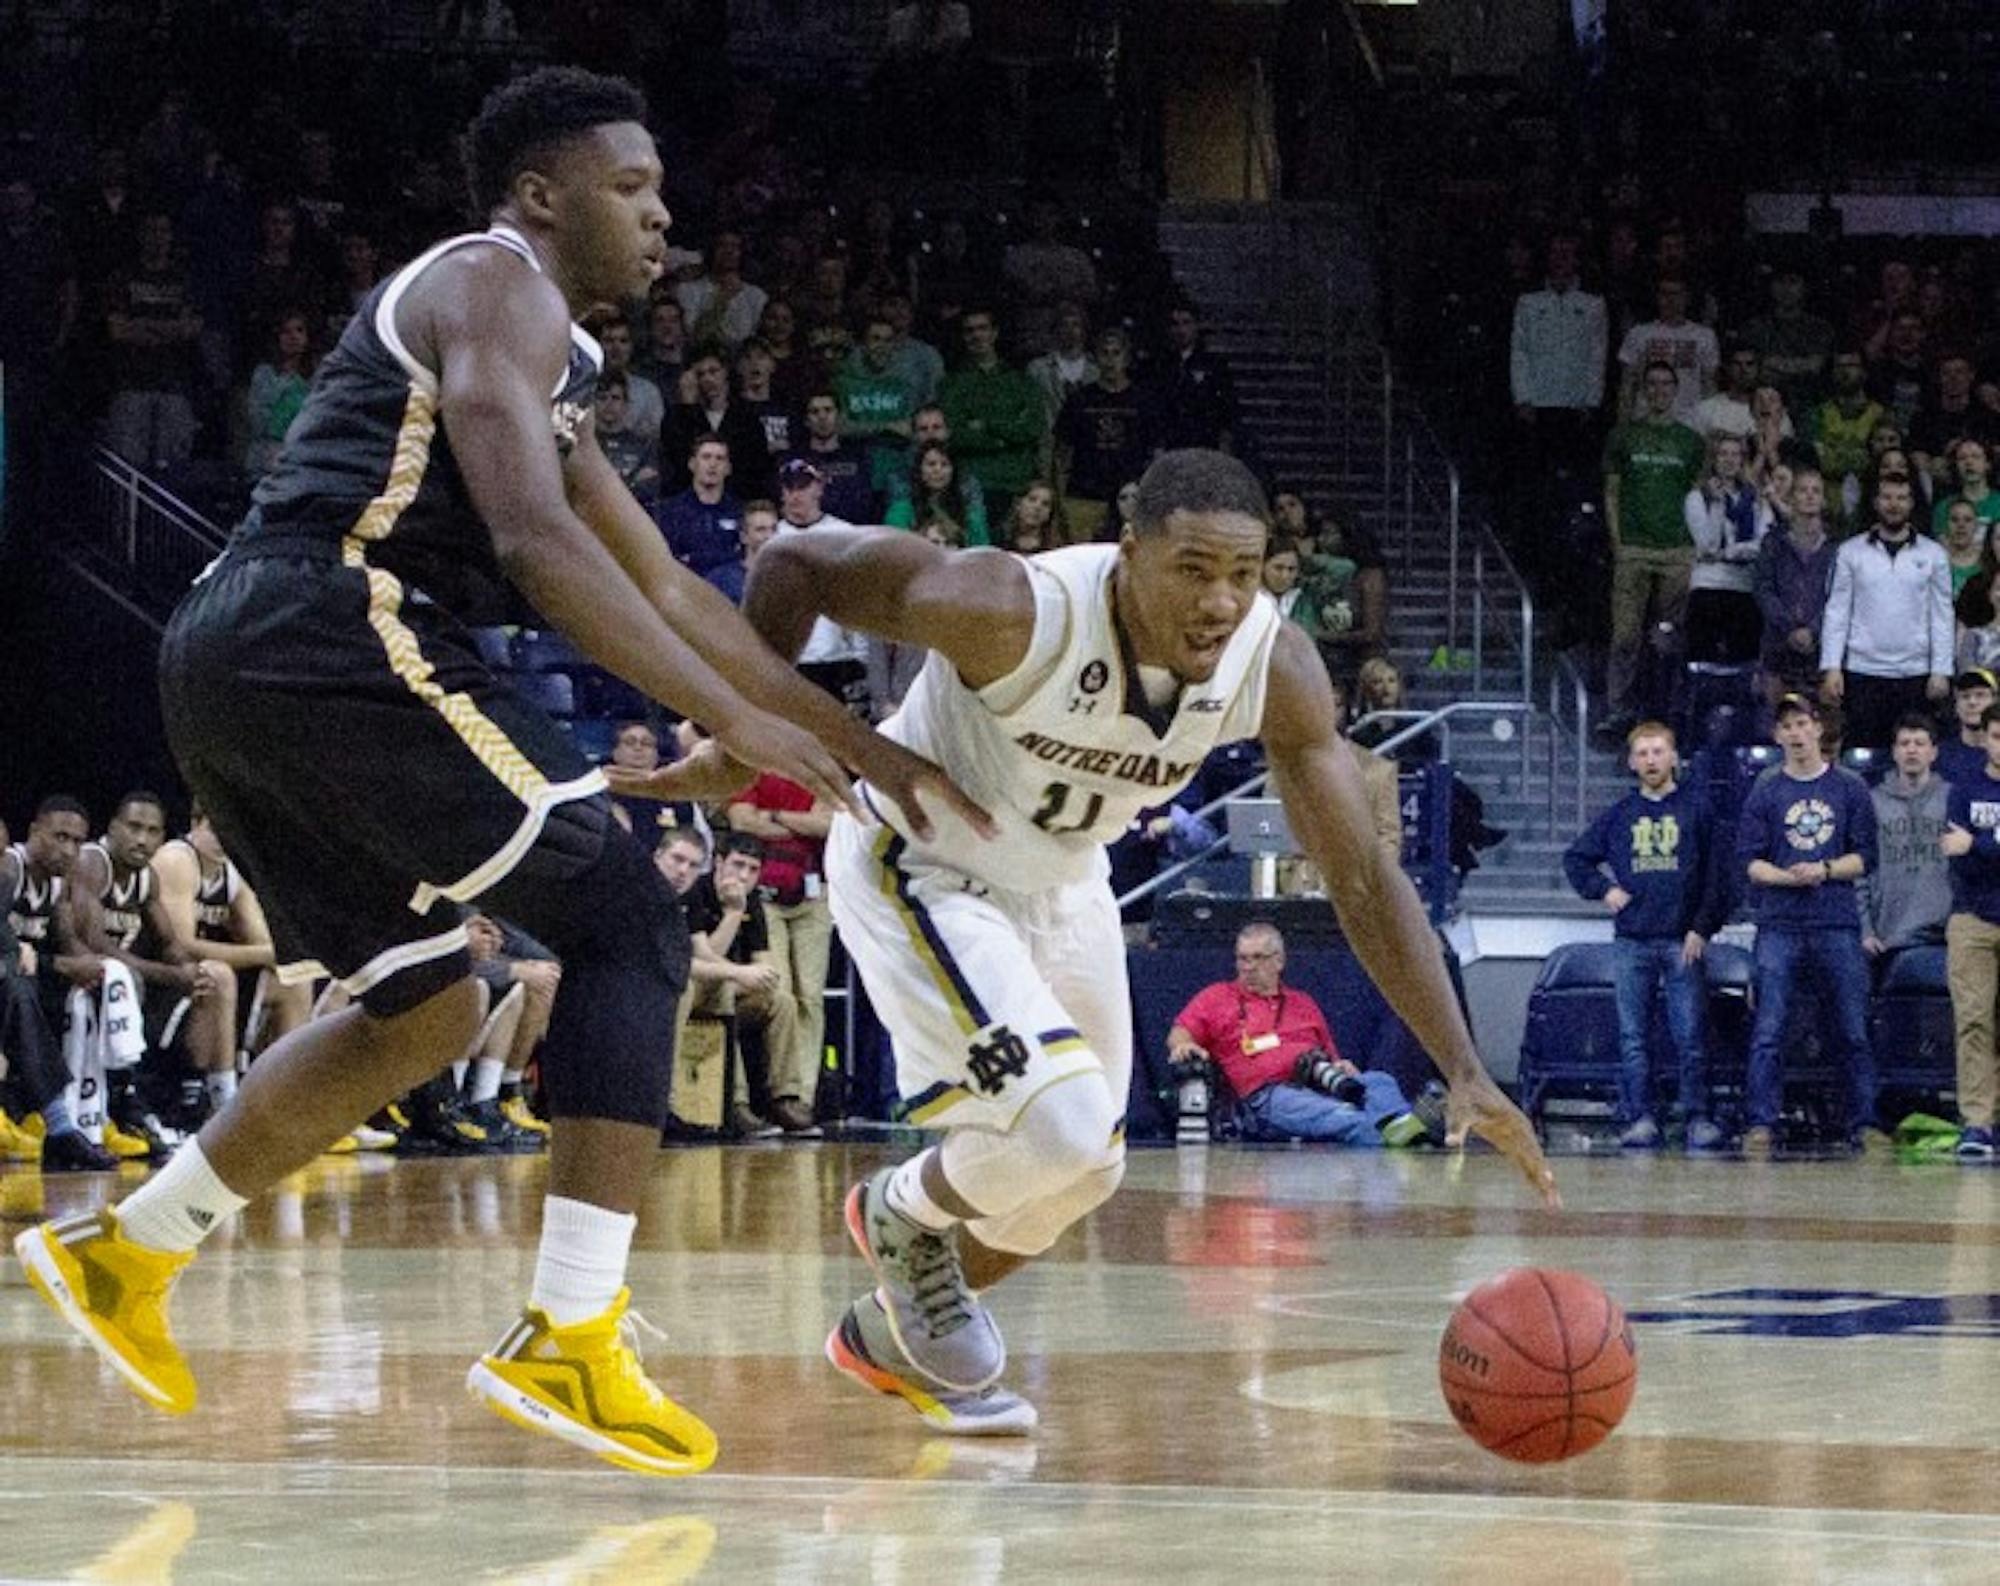 Junior guard Demitrius Jackson dribbles around a defender during Notre Dame’s 86-78 victory over  Milwaukee on Nov. 17. Jackson led the team with 20 points in the win.